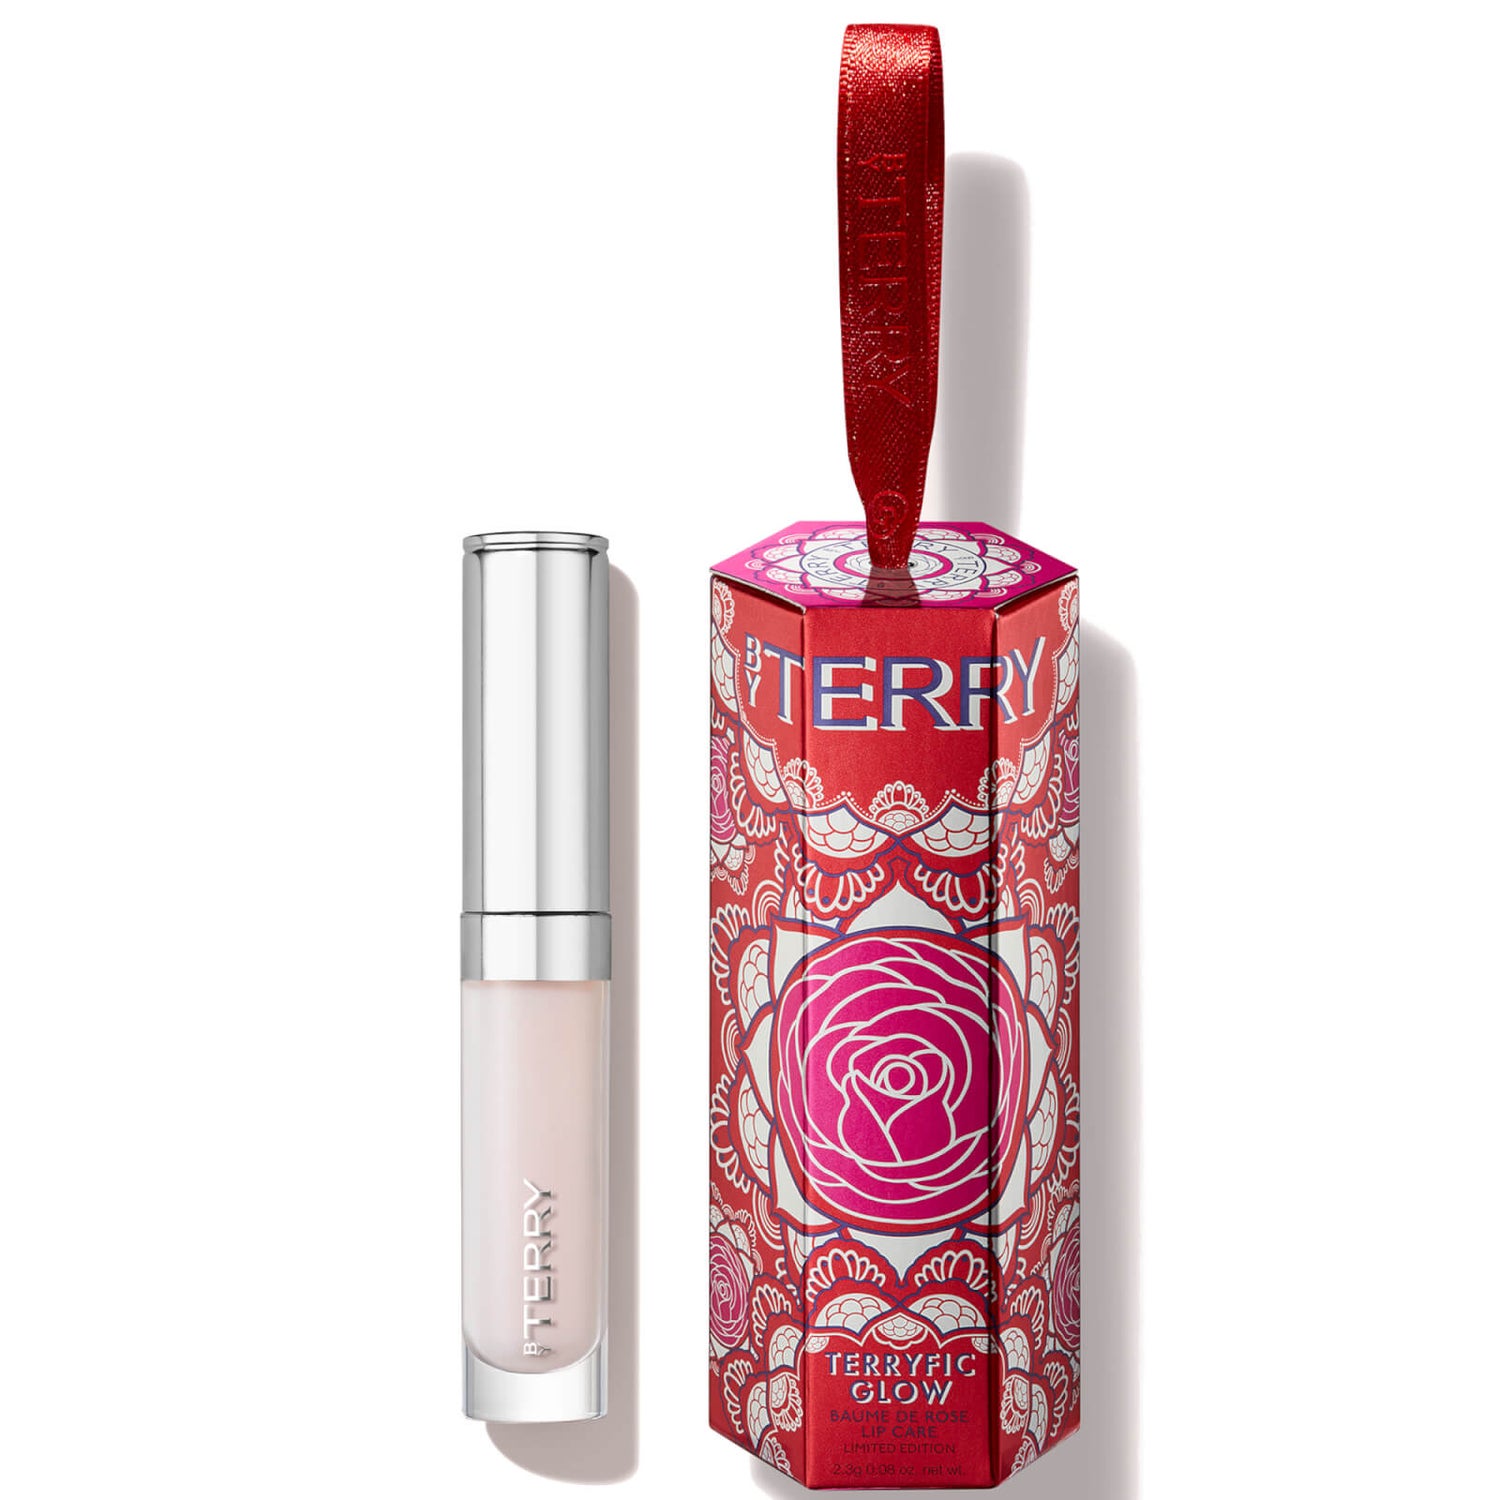 By Terry Terryfic Glow Baume De Rose Lip Care Set